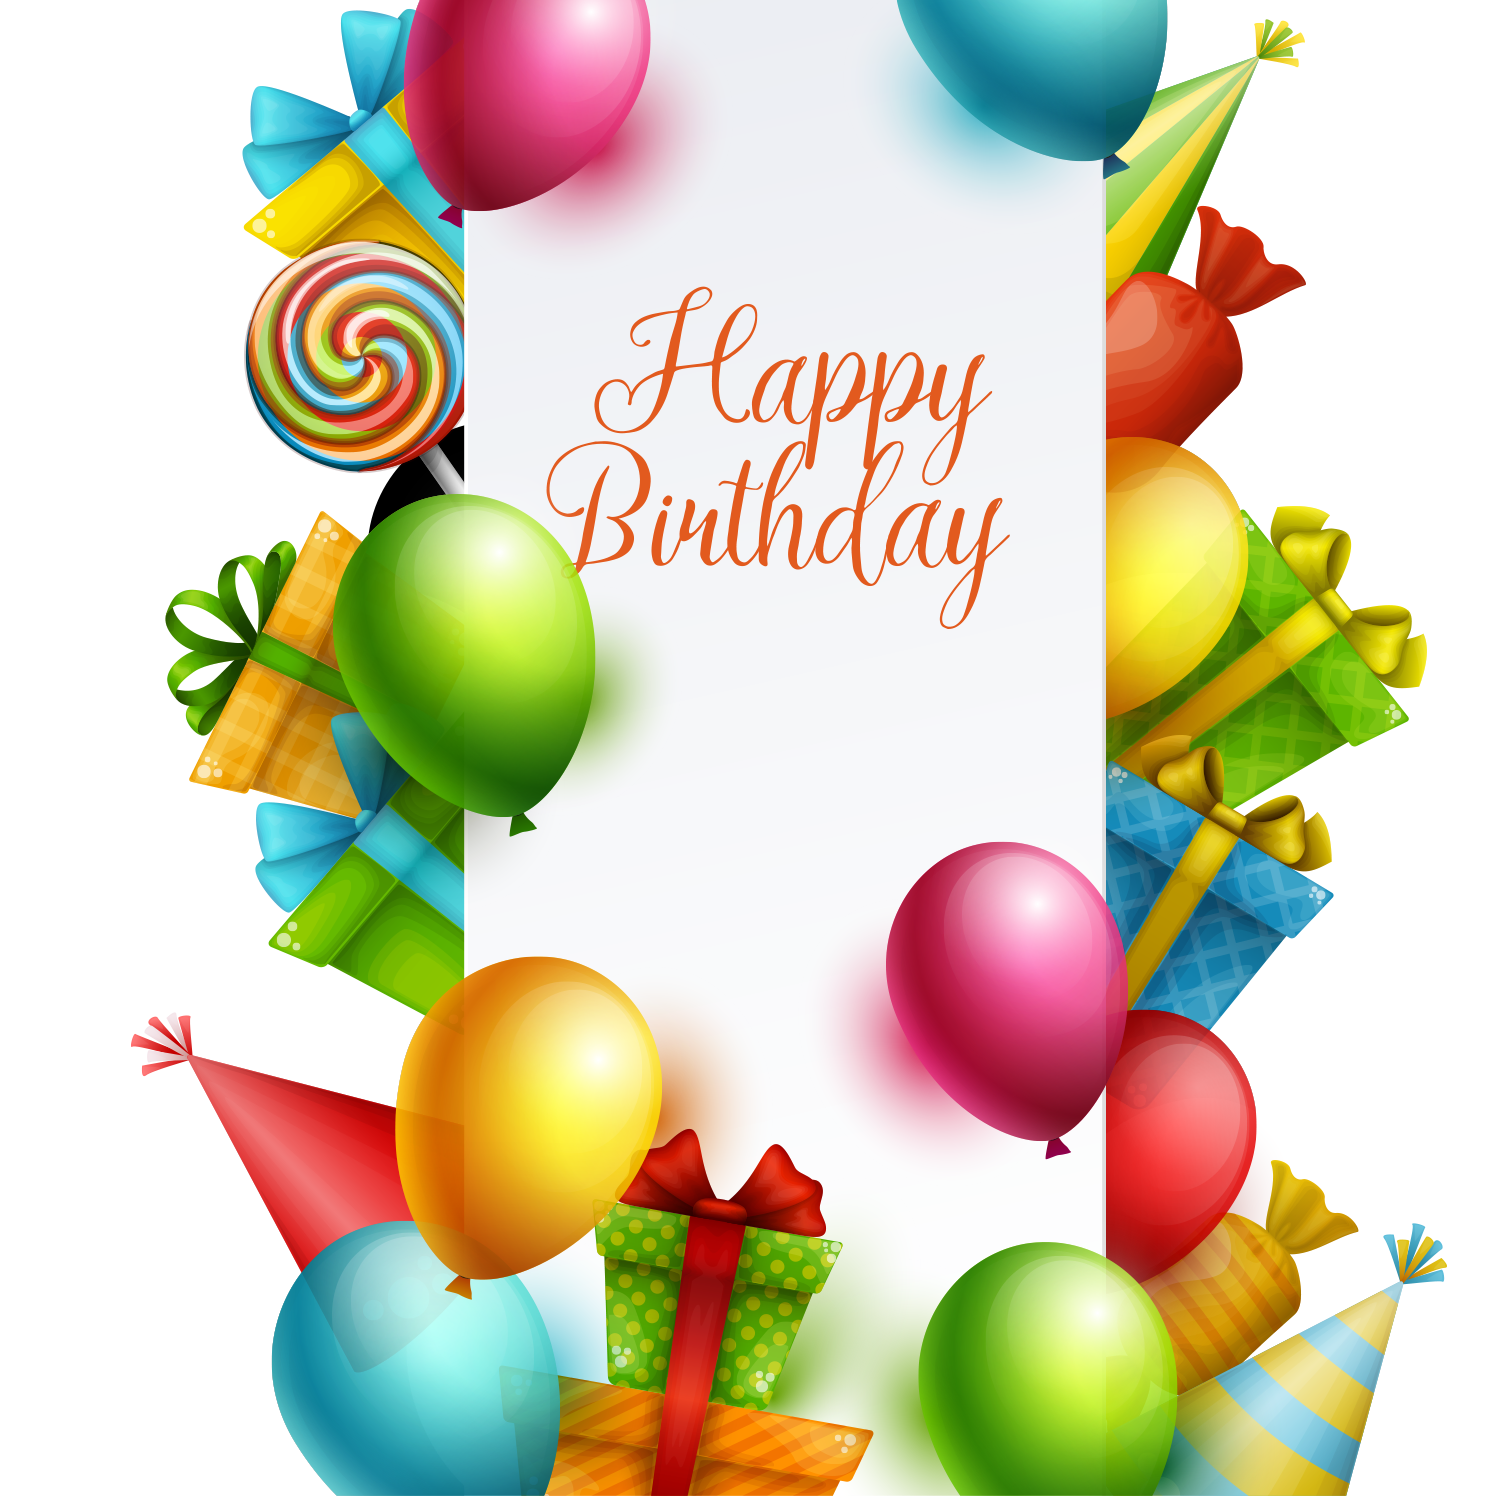 Happy Birthday Png Background Full Hd Download Best Hd Wallpaper Images